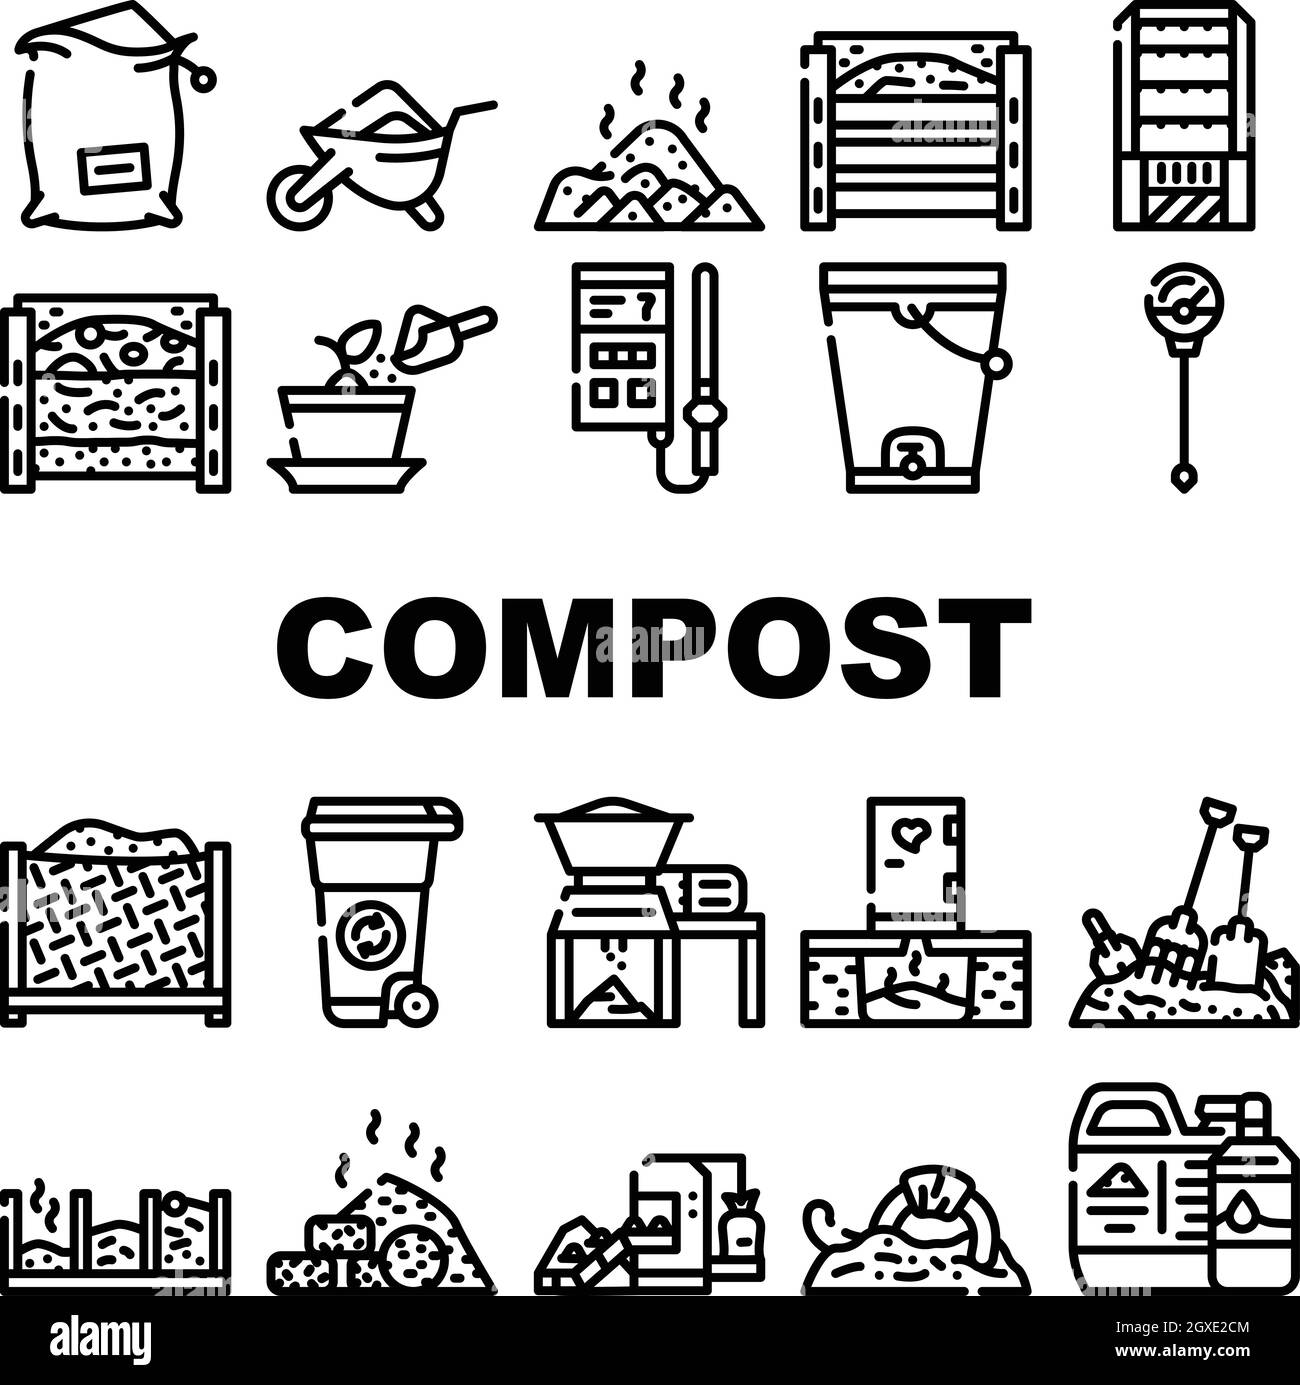 Compost Production Collection Icons Set Vector Stock Vector